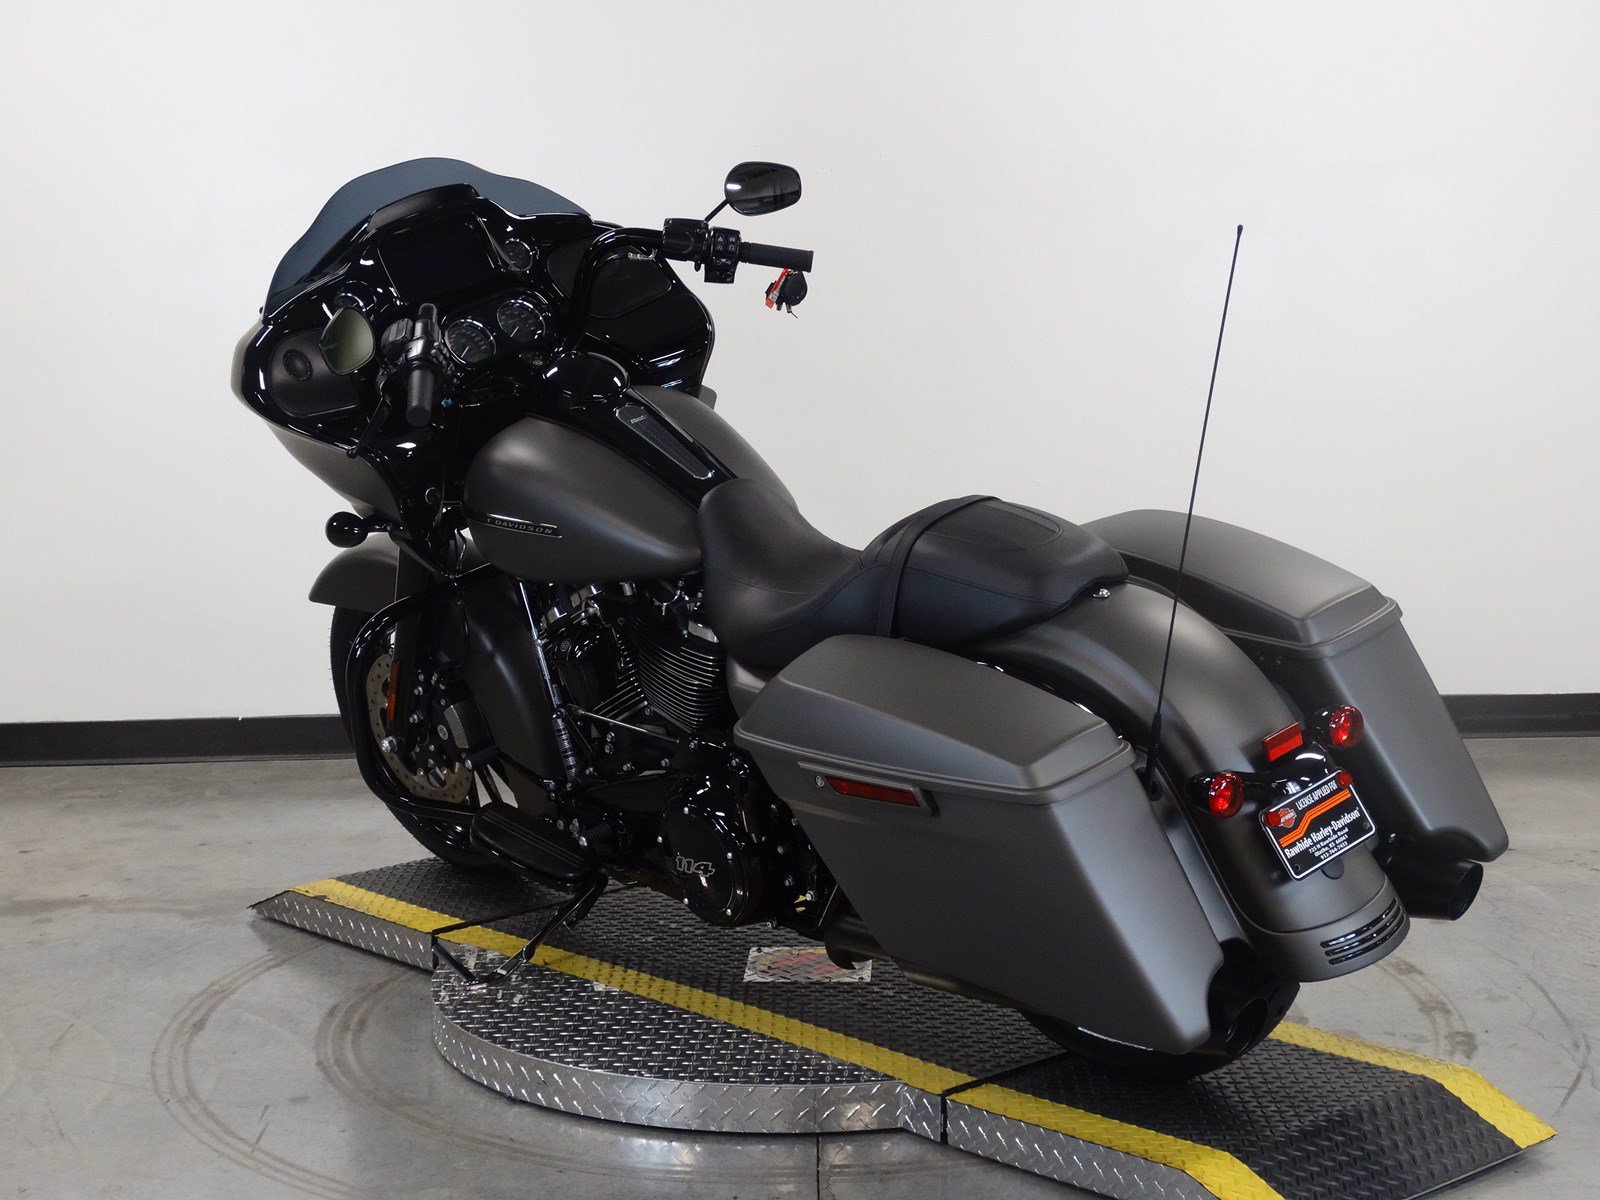 New 2019 Harley-Davidson Road Glide Special FLTRXS Touring in